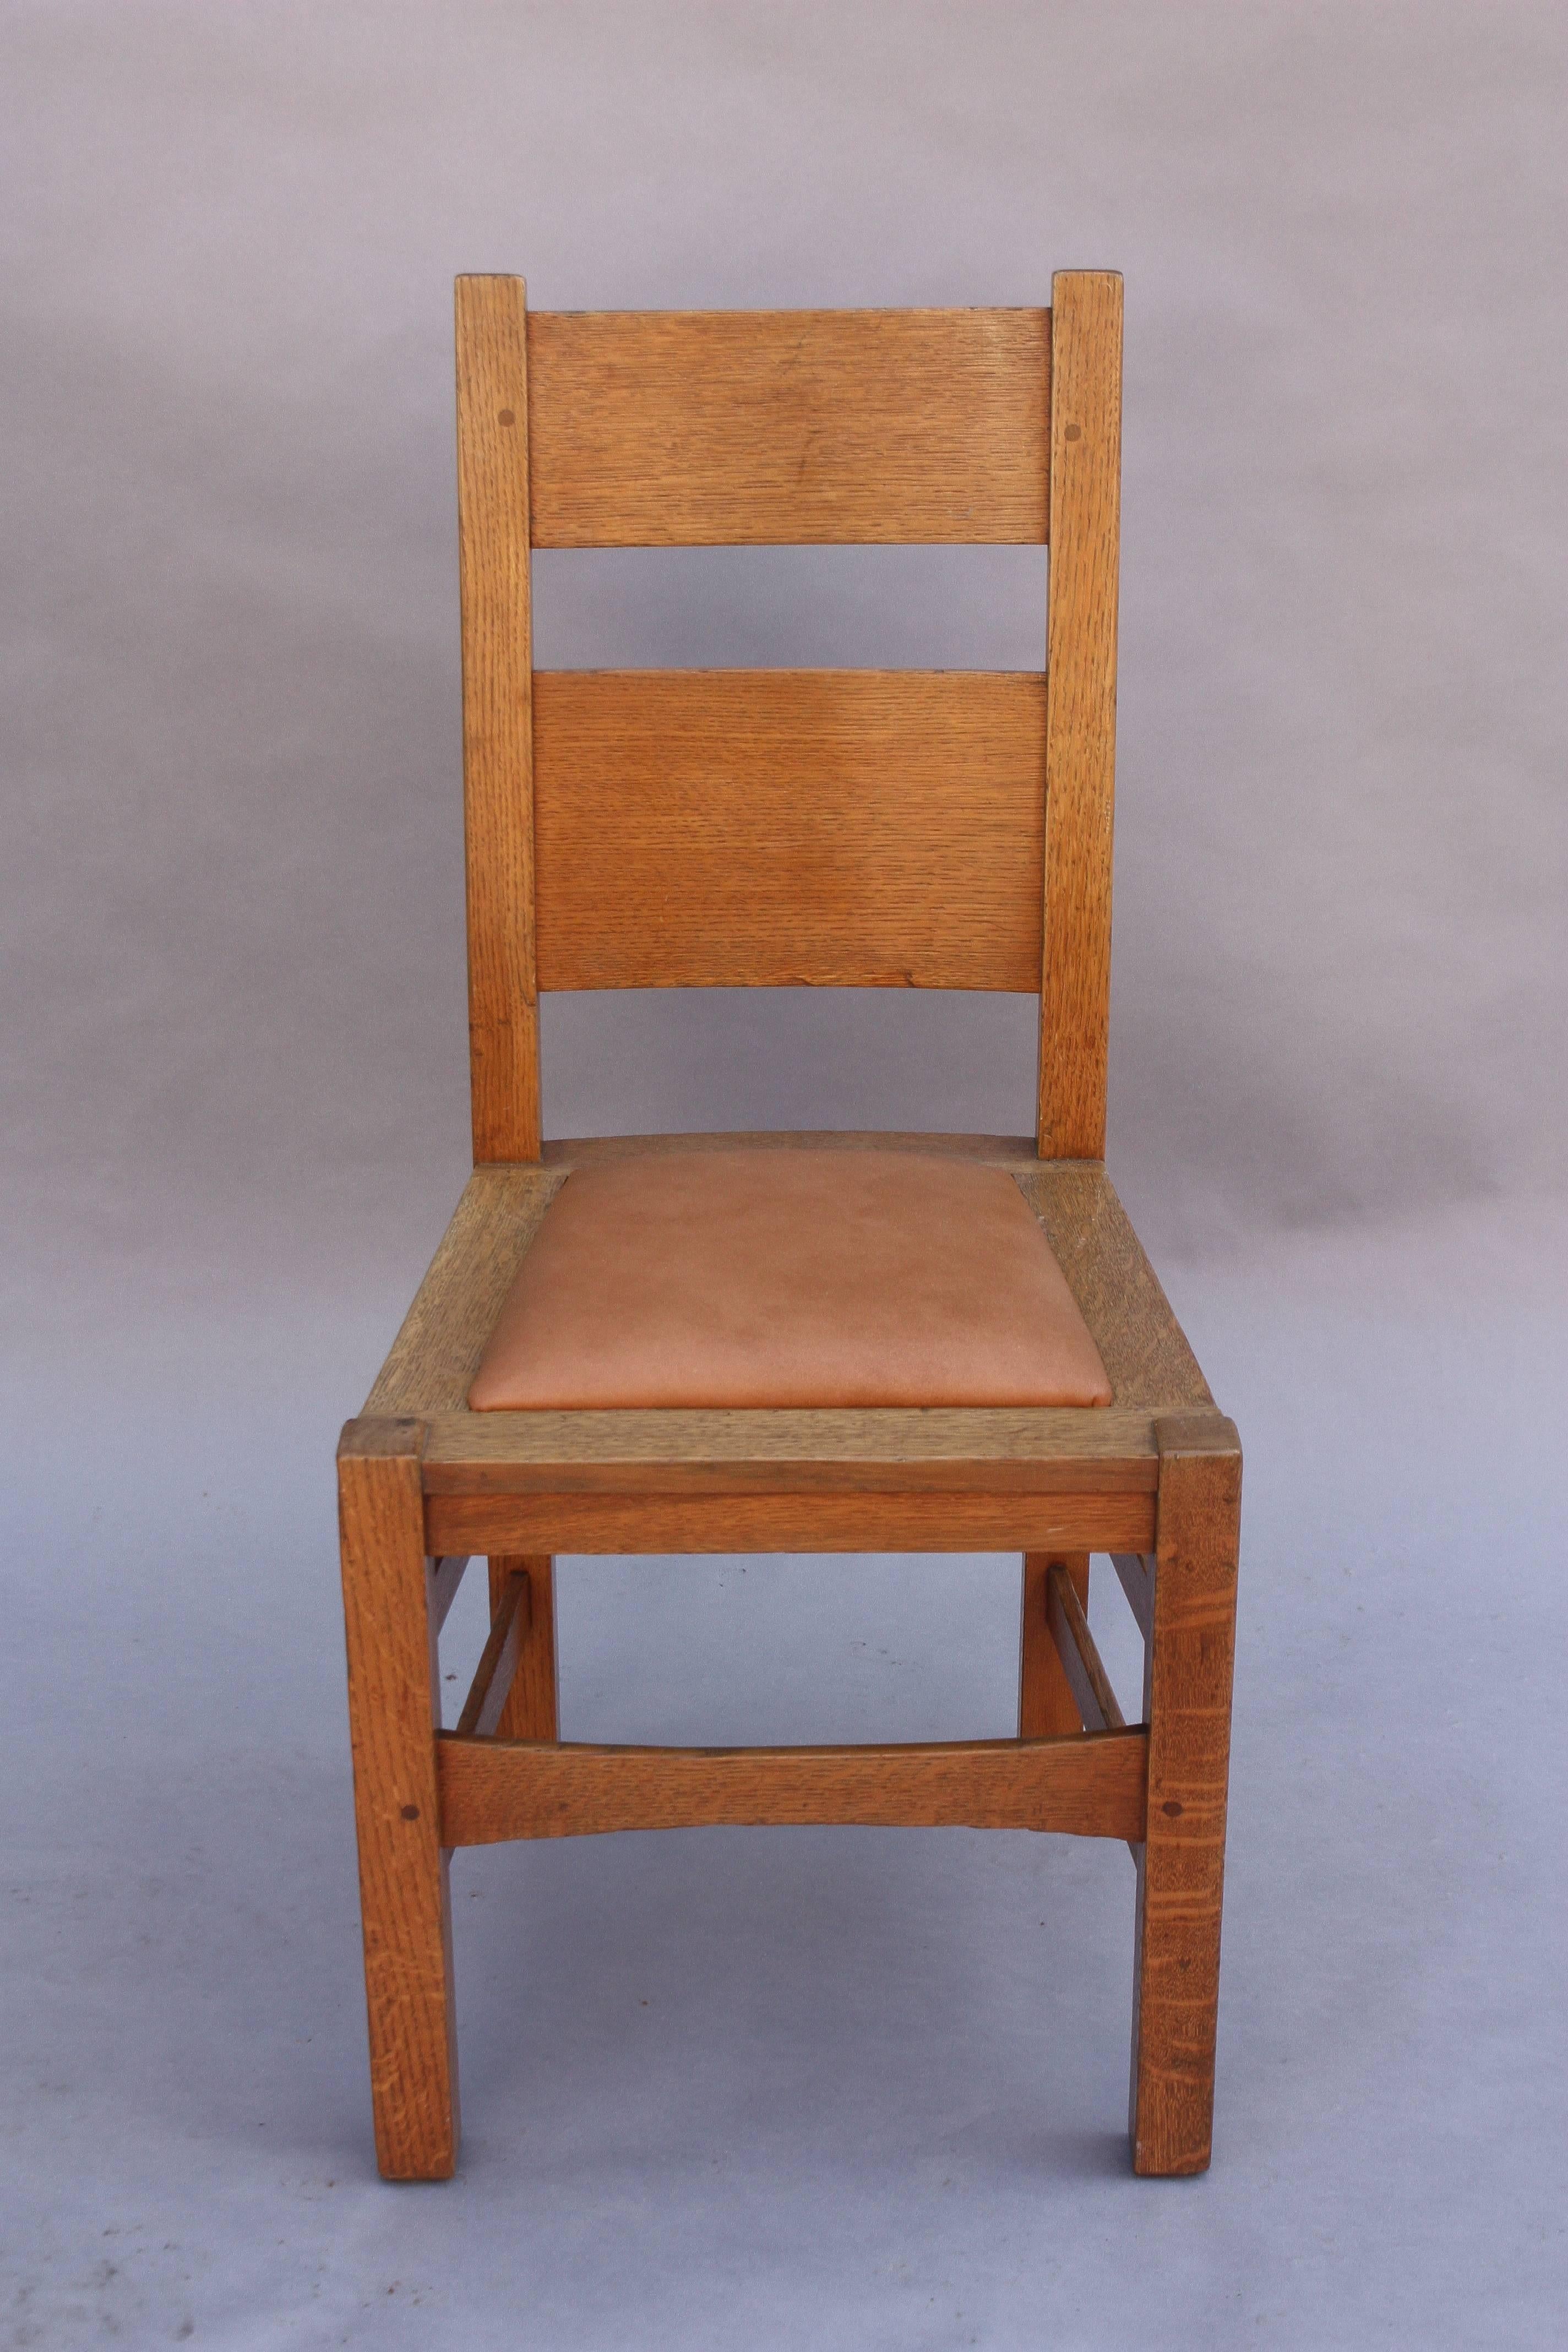 1910, craftsman era side chairs with light finish and new leather upholstery. Priced and sold individually.